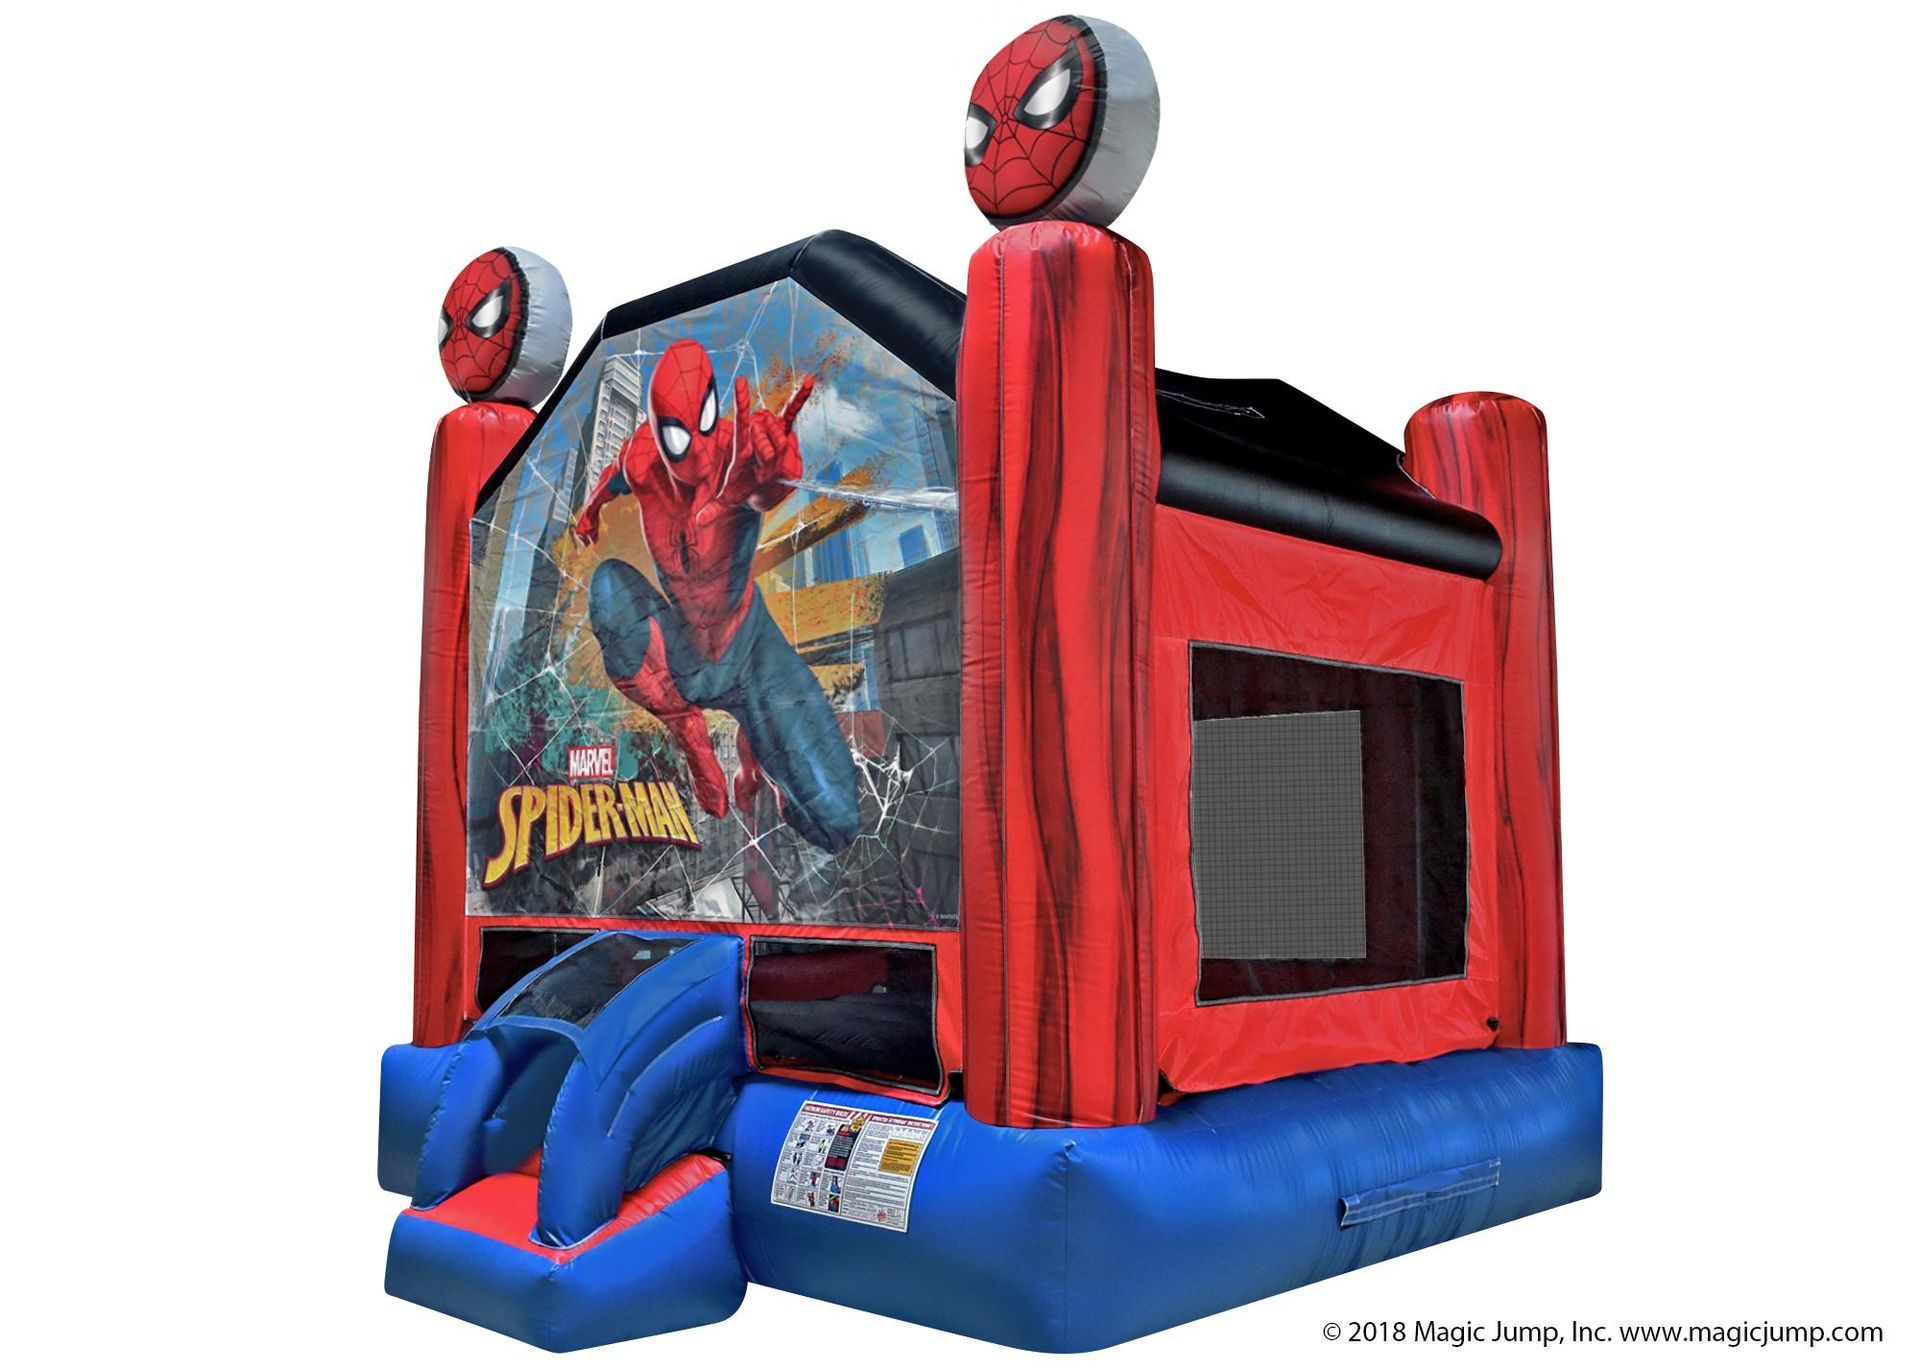 Red and Blue Bouncy House with a Picture of Spiderman on it | Rancho Cucamonga, CA | Jam Jam Bounce house and inflatables